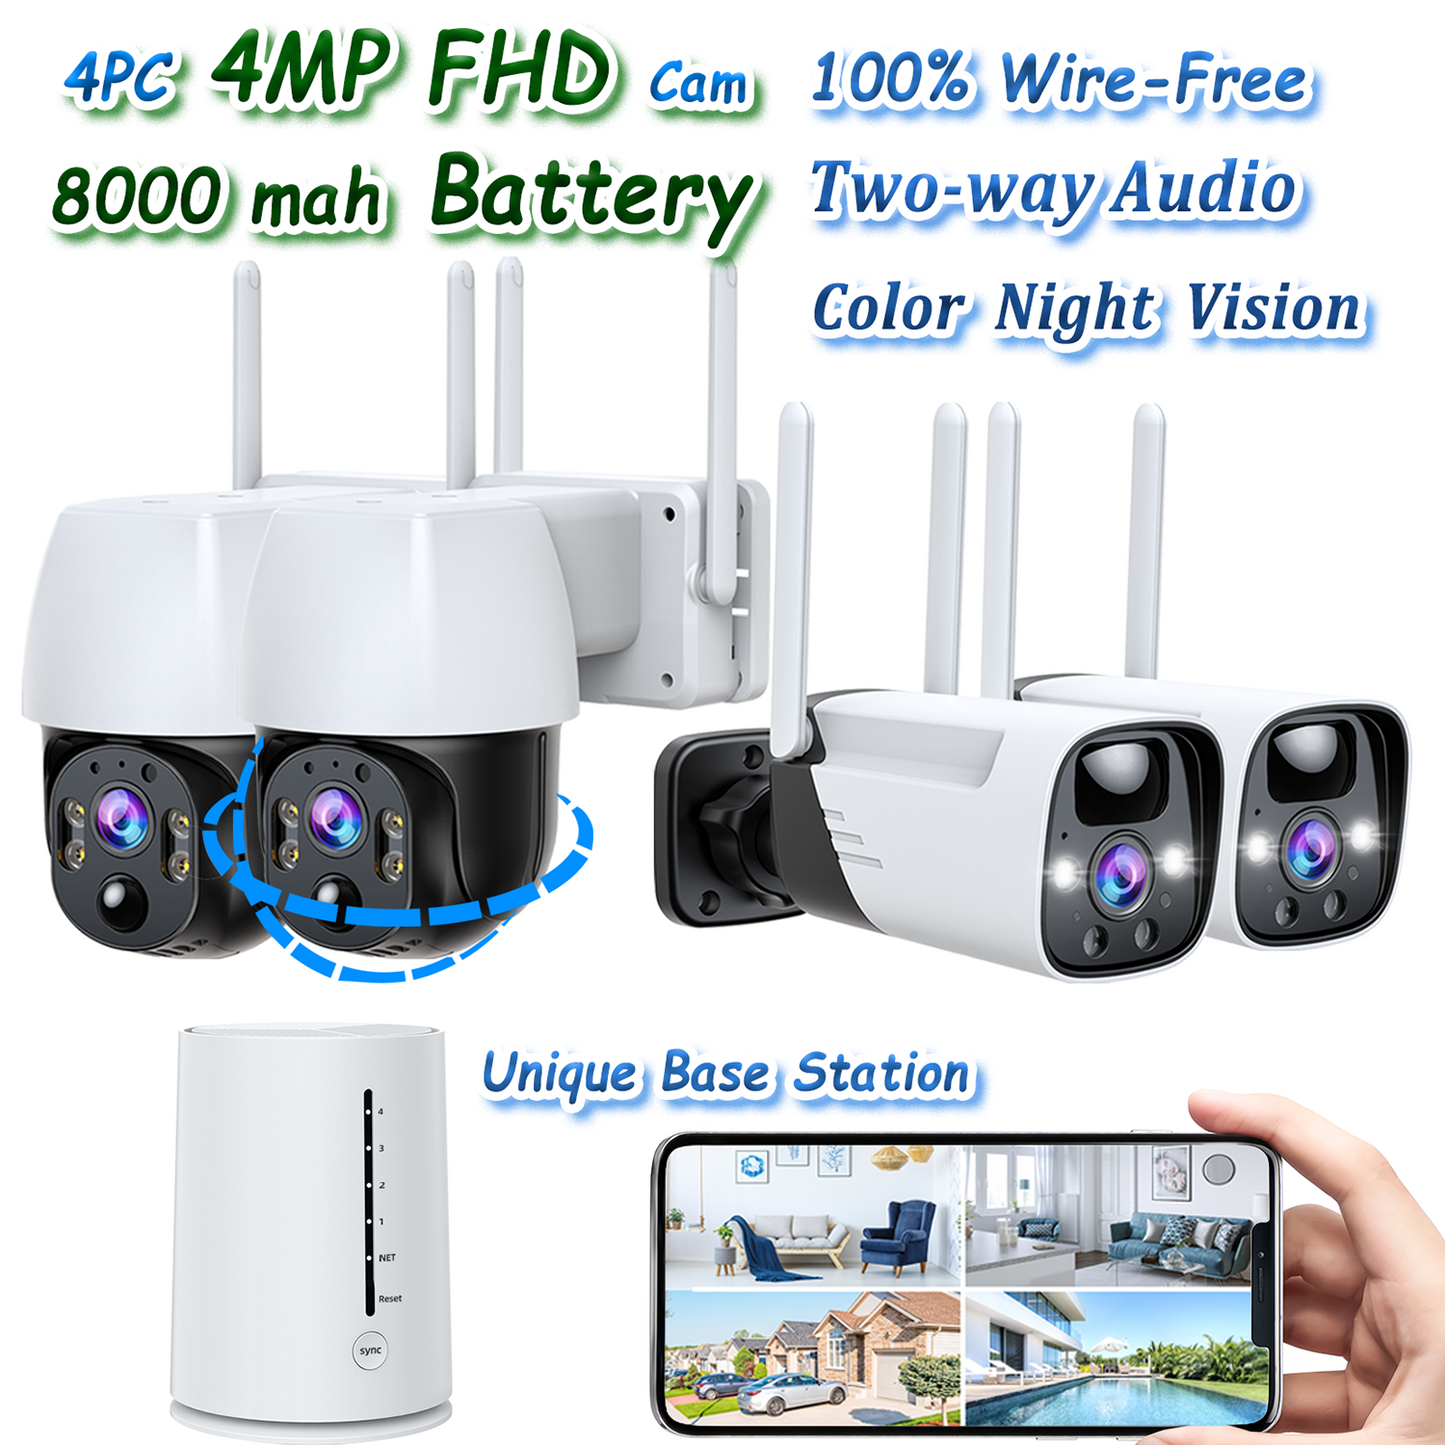 Toguard 4MP Wireless Security Camera System Outdoor, 8000mAh Battery Security Camera with Color Night Vision 2-Way Audio, Support Solar Operated(not included)